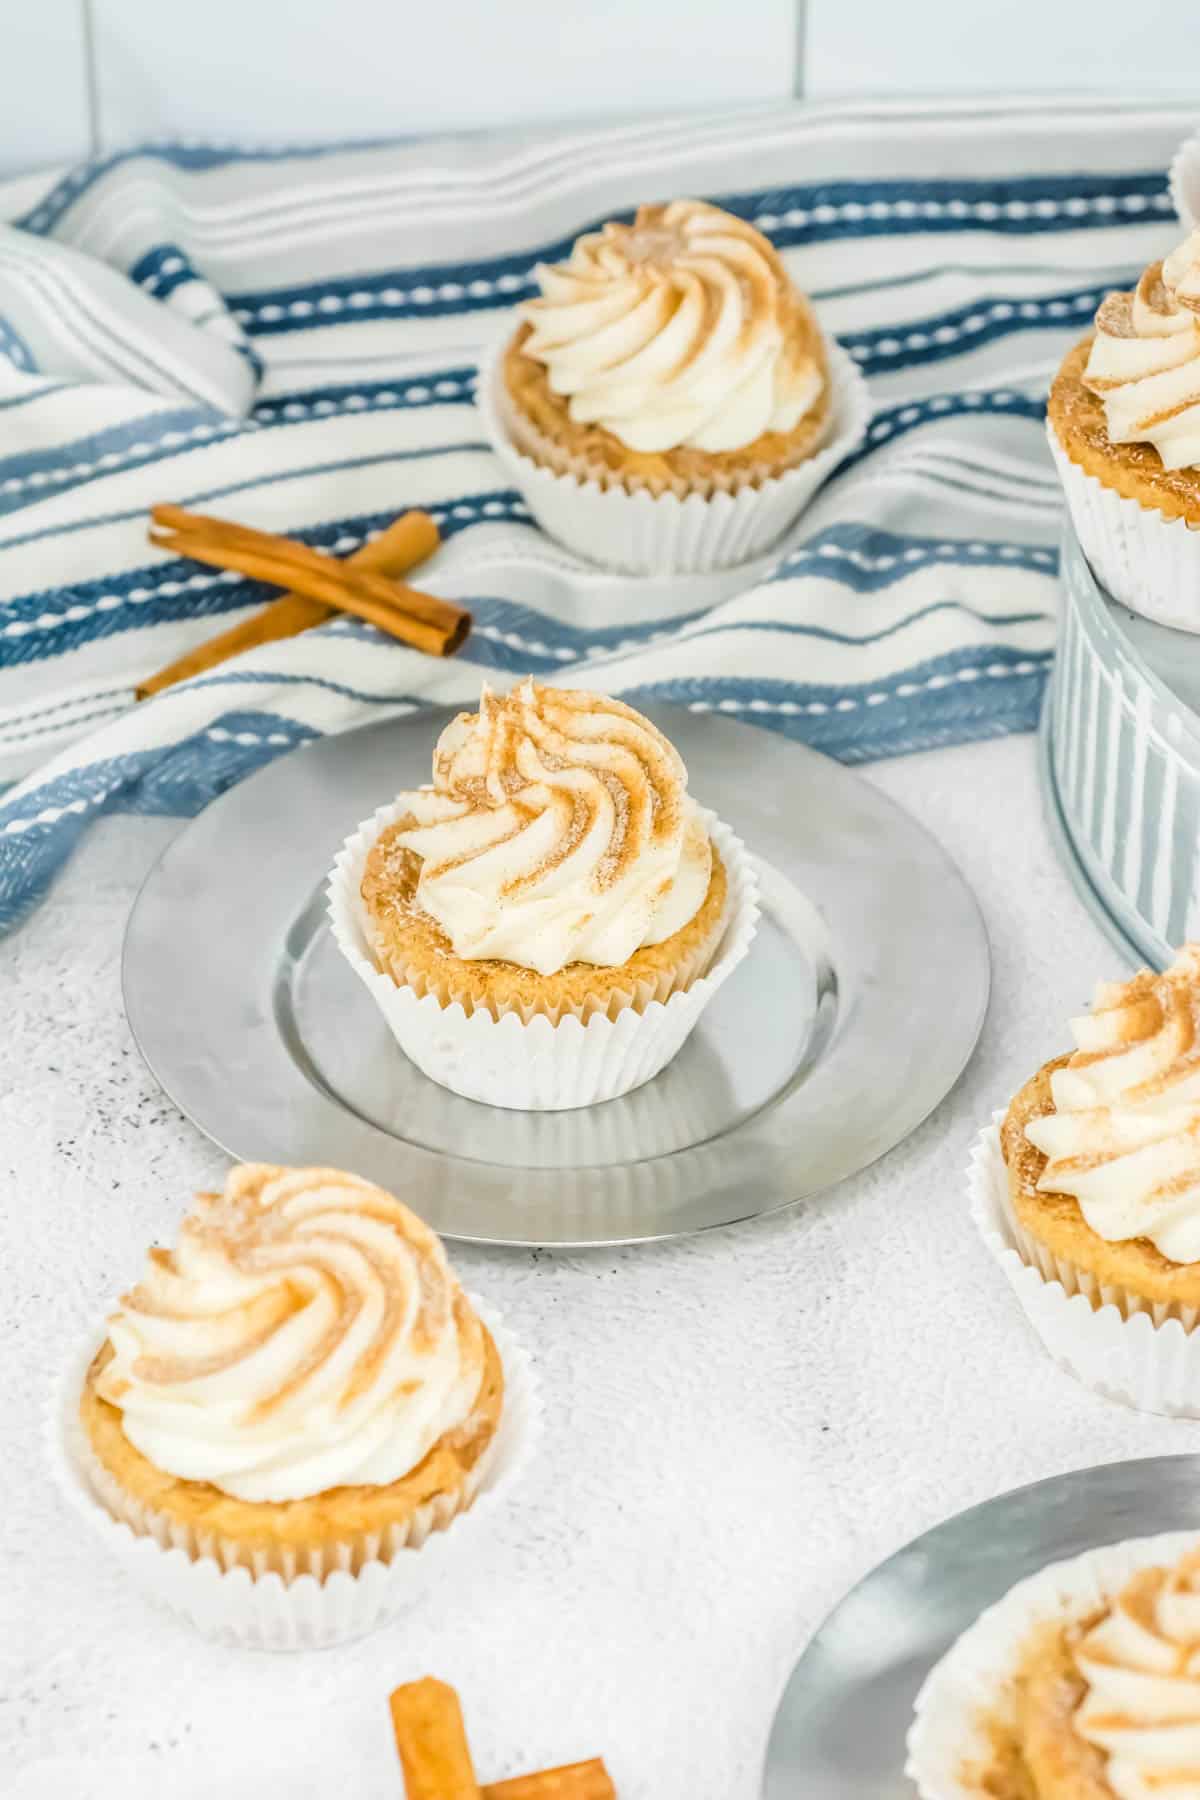 RumChata cupcakes with buttercream frosting and cinnamon sugar topping, blue and white striped kitchen cloth in the background with loose cinnamon sticks.